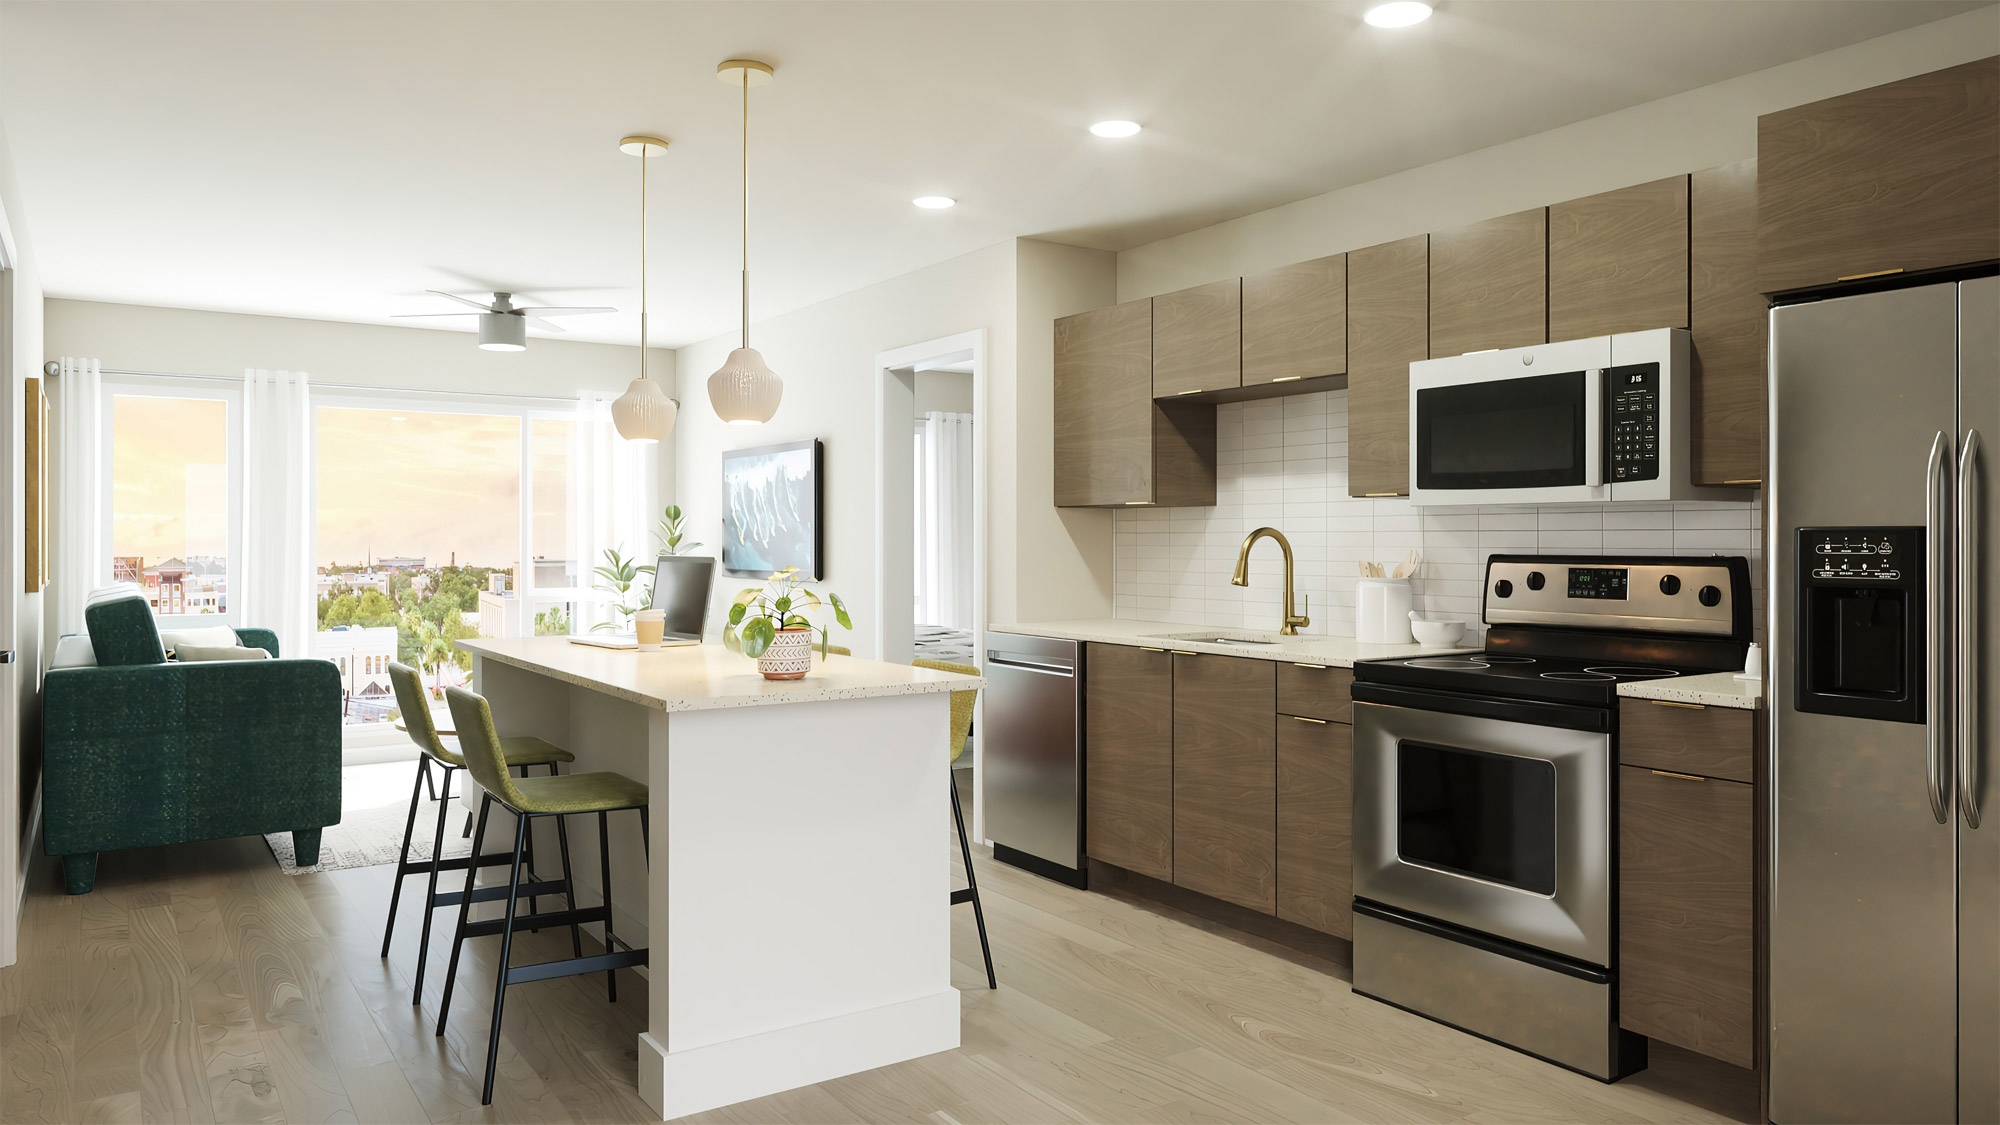 Representative rendering of kitchens at Sweetwater.